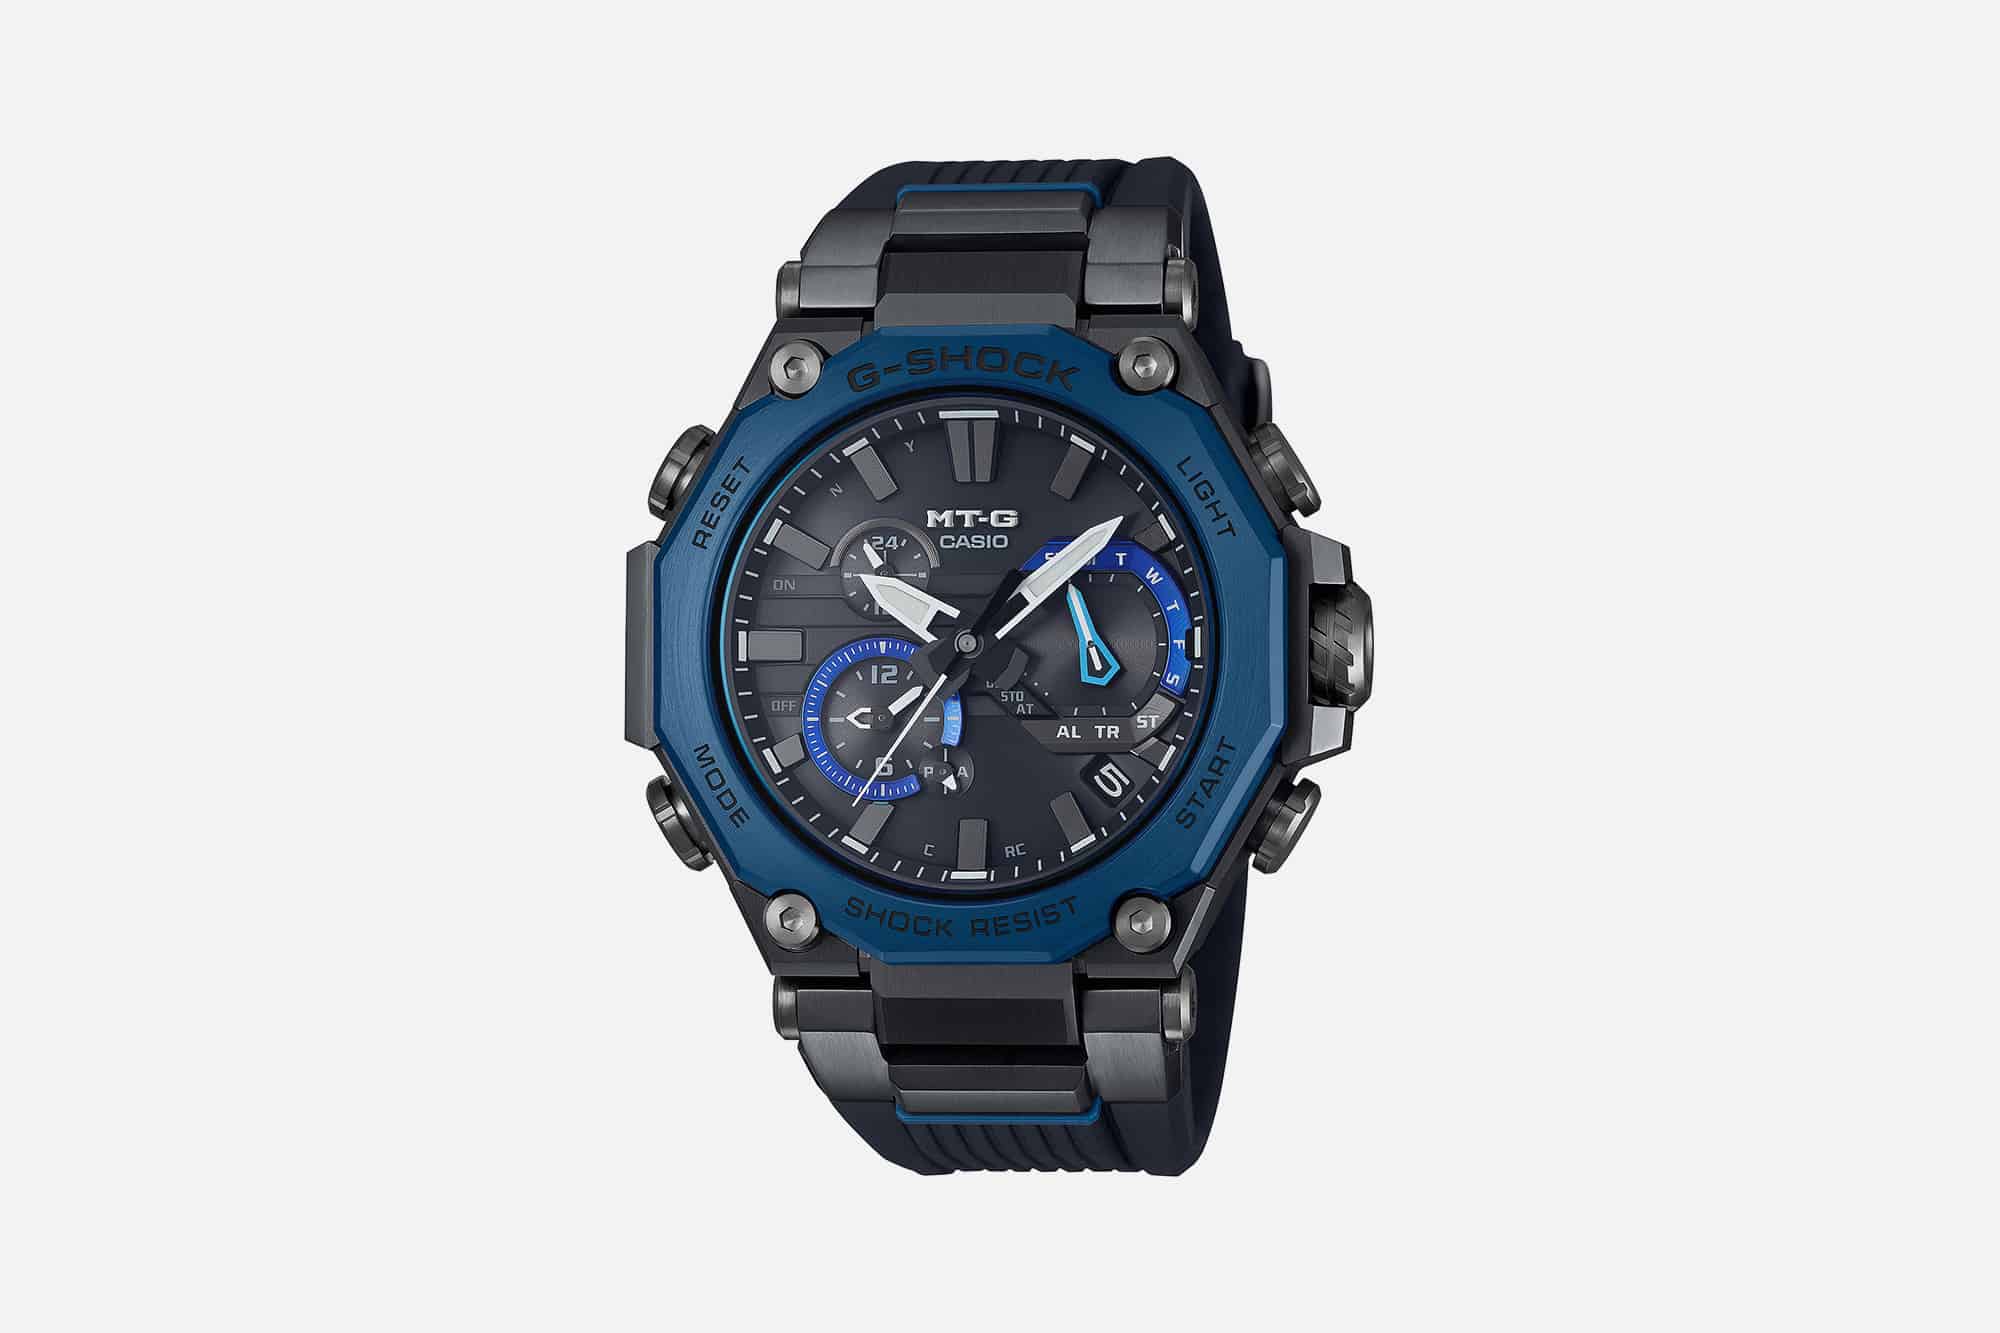 G-Shock Unveils Another MT-G with a Carbon Fiber Reinforced Case